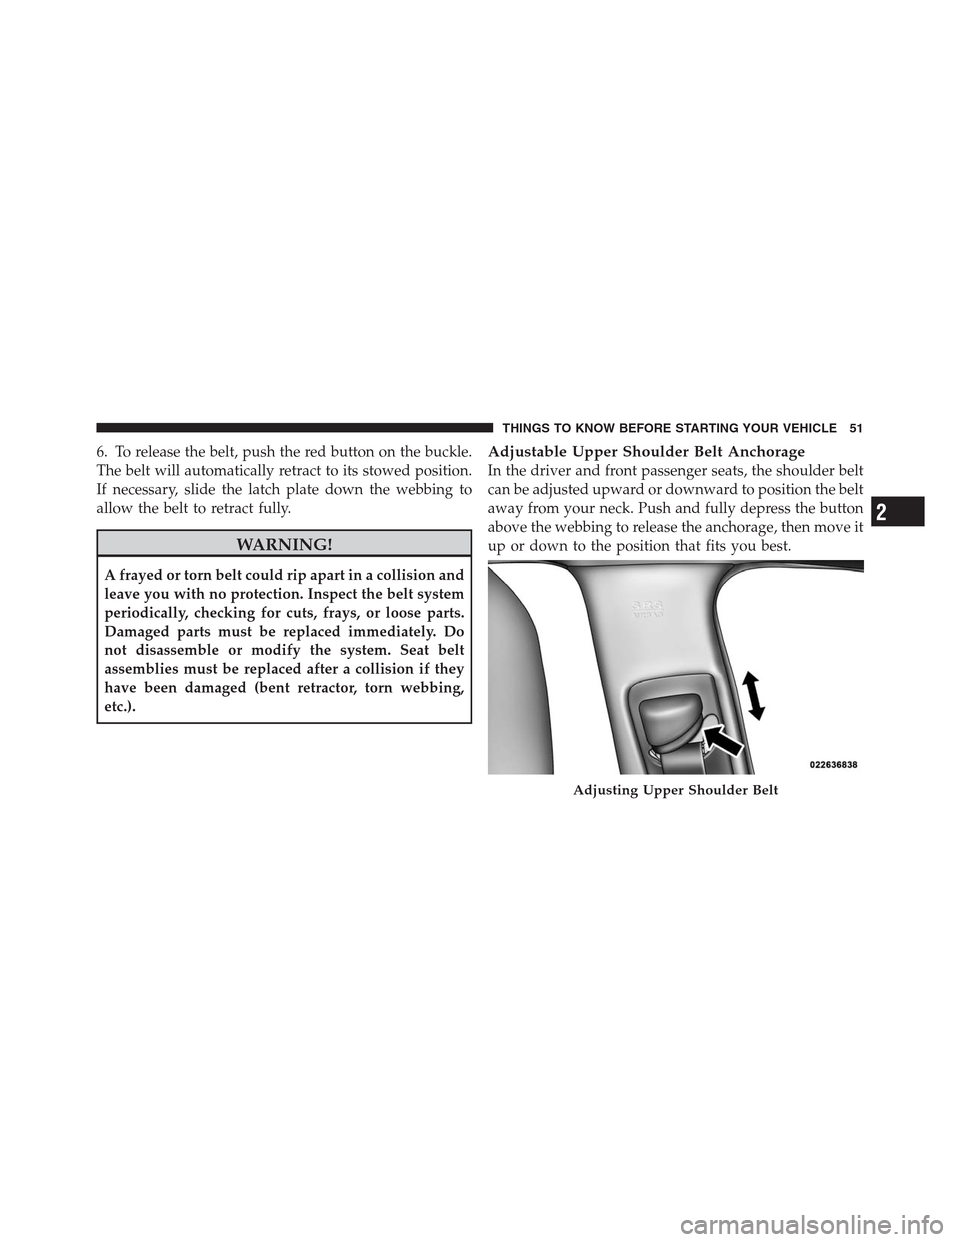 CHRYSLER 300 2012 2.G Owners Manual 6. To release the belt, push the red button on the buckle.
The belt will automatically retract to its stowed position.
If necessary, slide the latch plate down the webbing to
allow the belt to retract